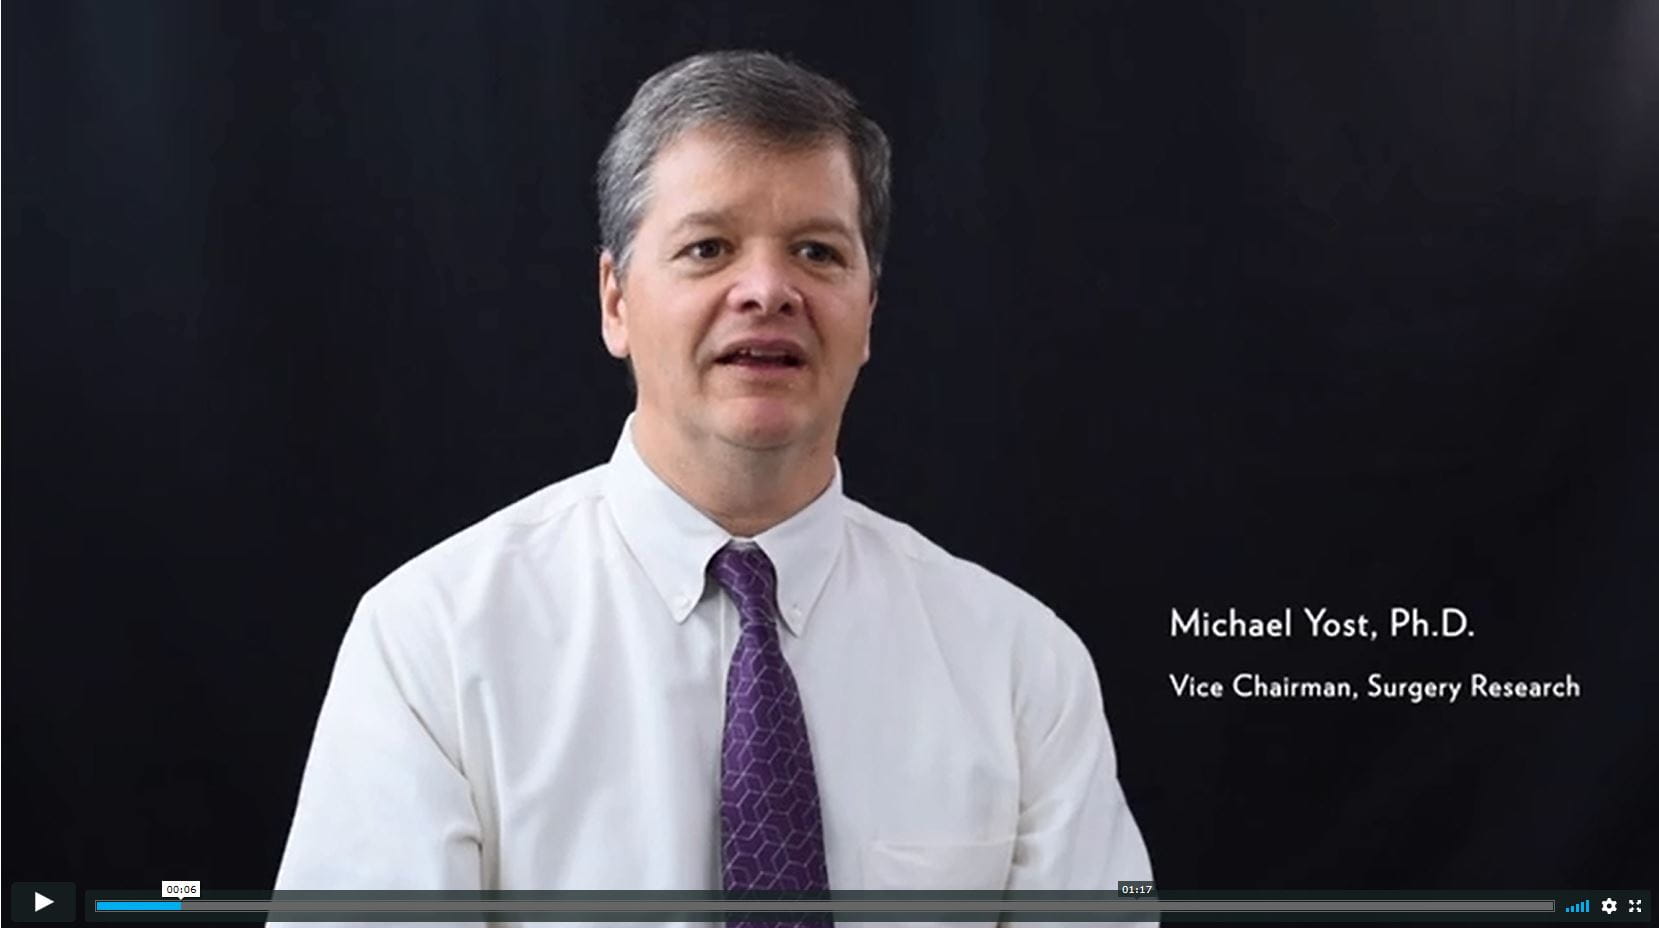 Mike Yost, Ph.D. talks about research in the Department of Surgery